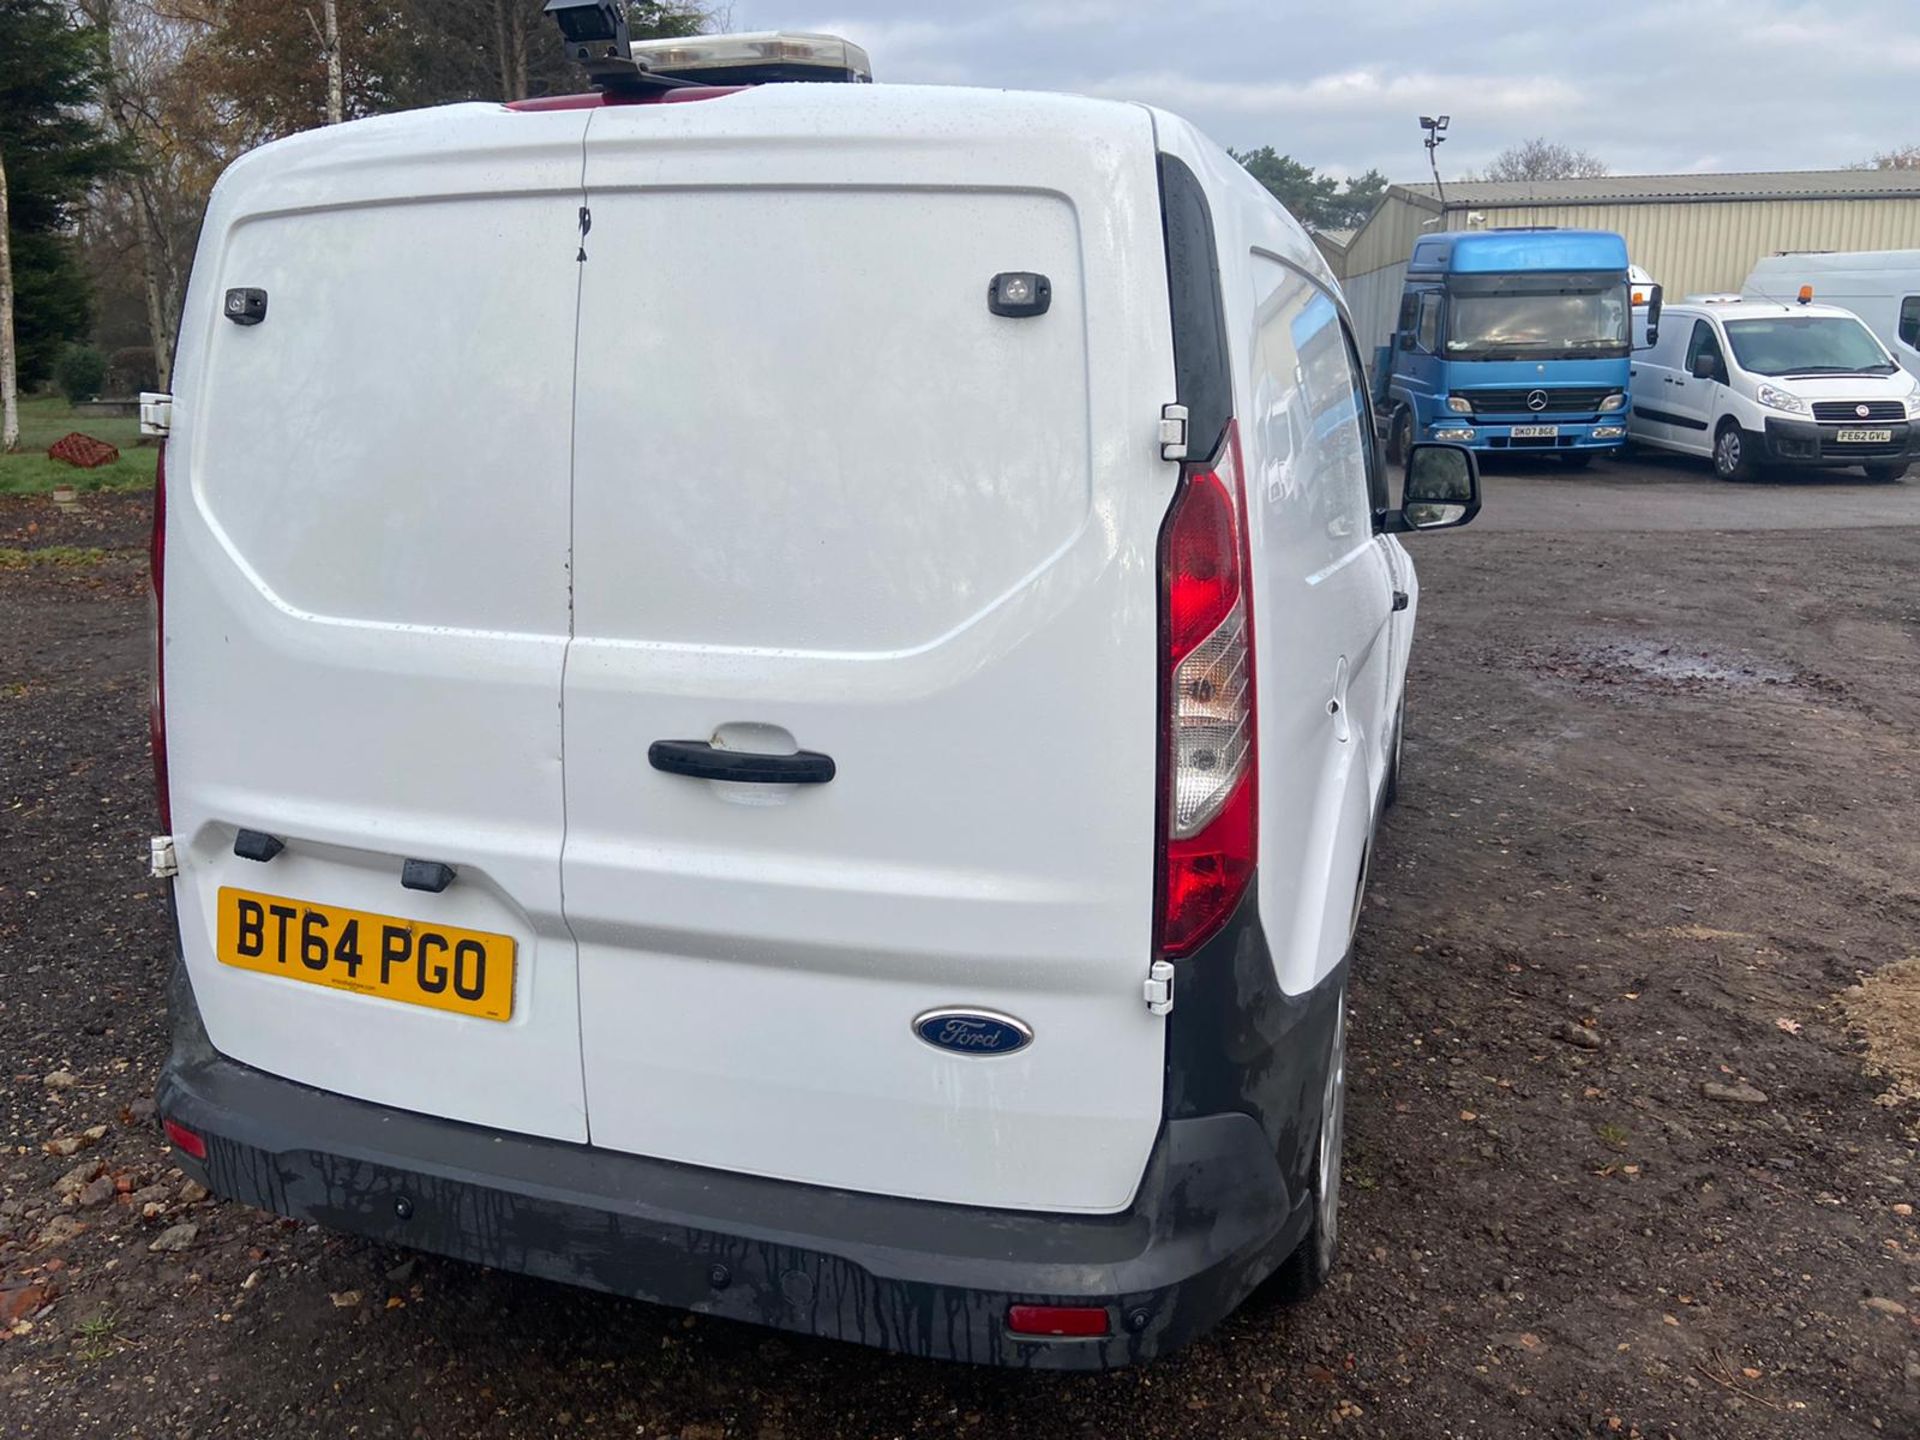 2015/64 REG FORD TRANSIT CONNECT 200 ECONETIC 1.6 DIESEL WHITE PANEL VAN, SHOWING 0 FORMER KEEPERS - Image 5 of 10